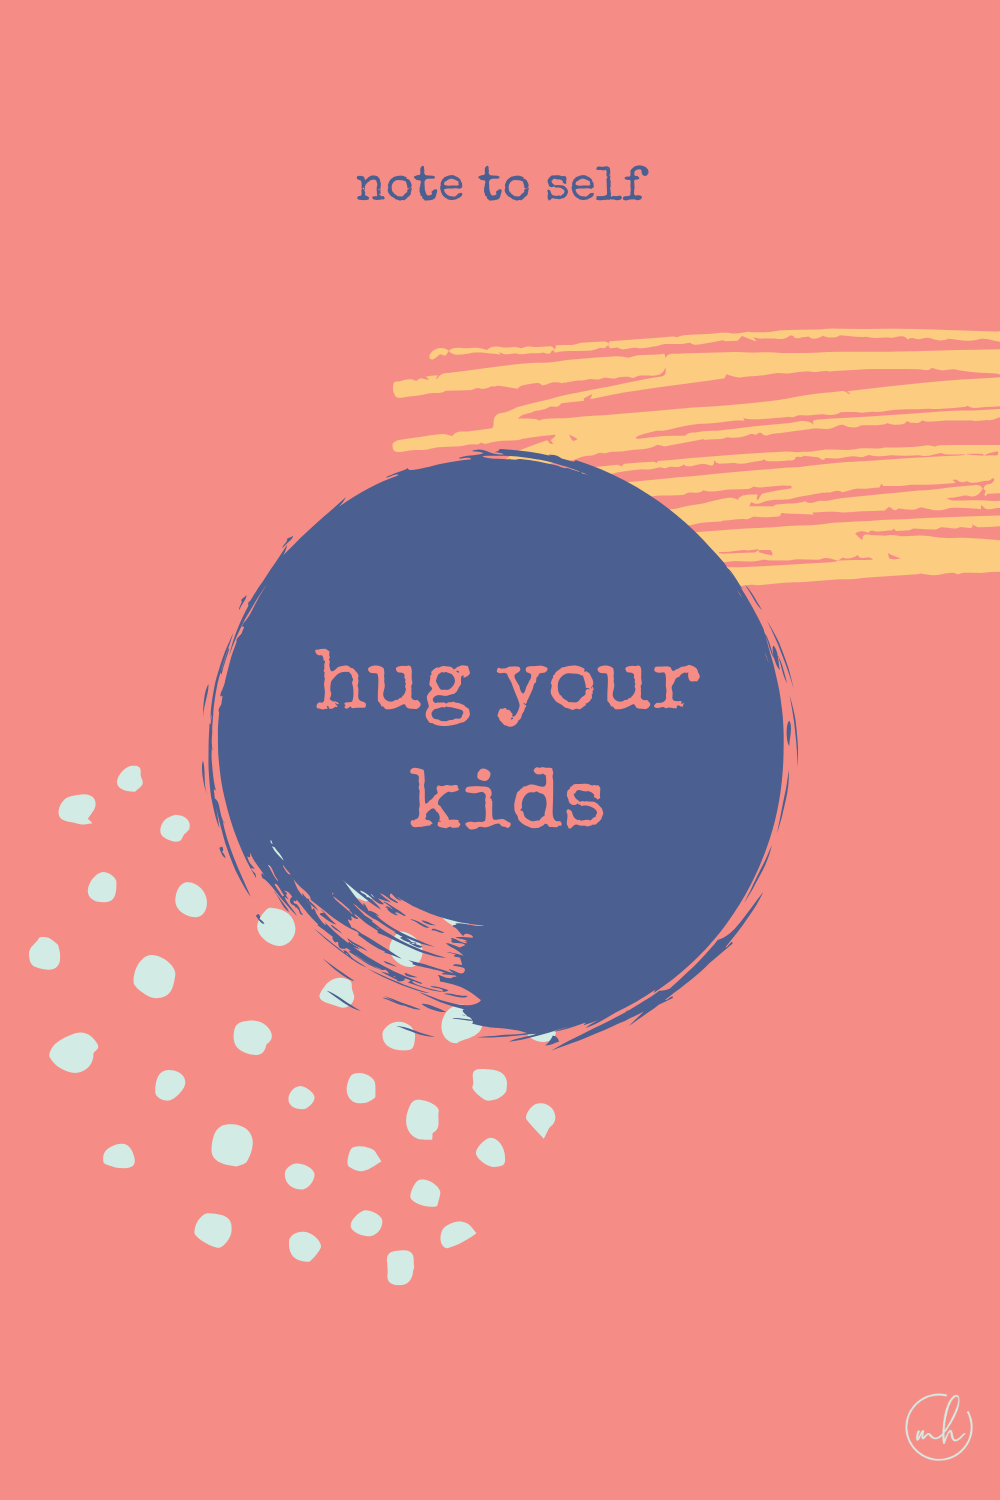 Hug your kids - Note to self quotes | myhoogah